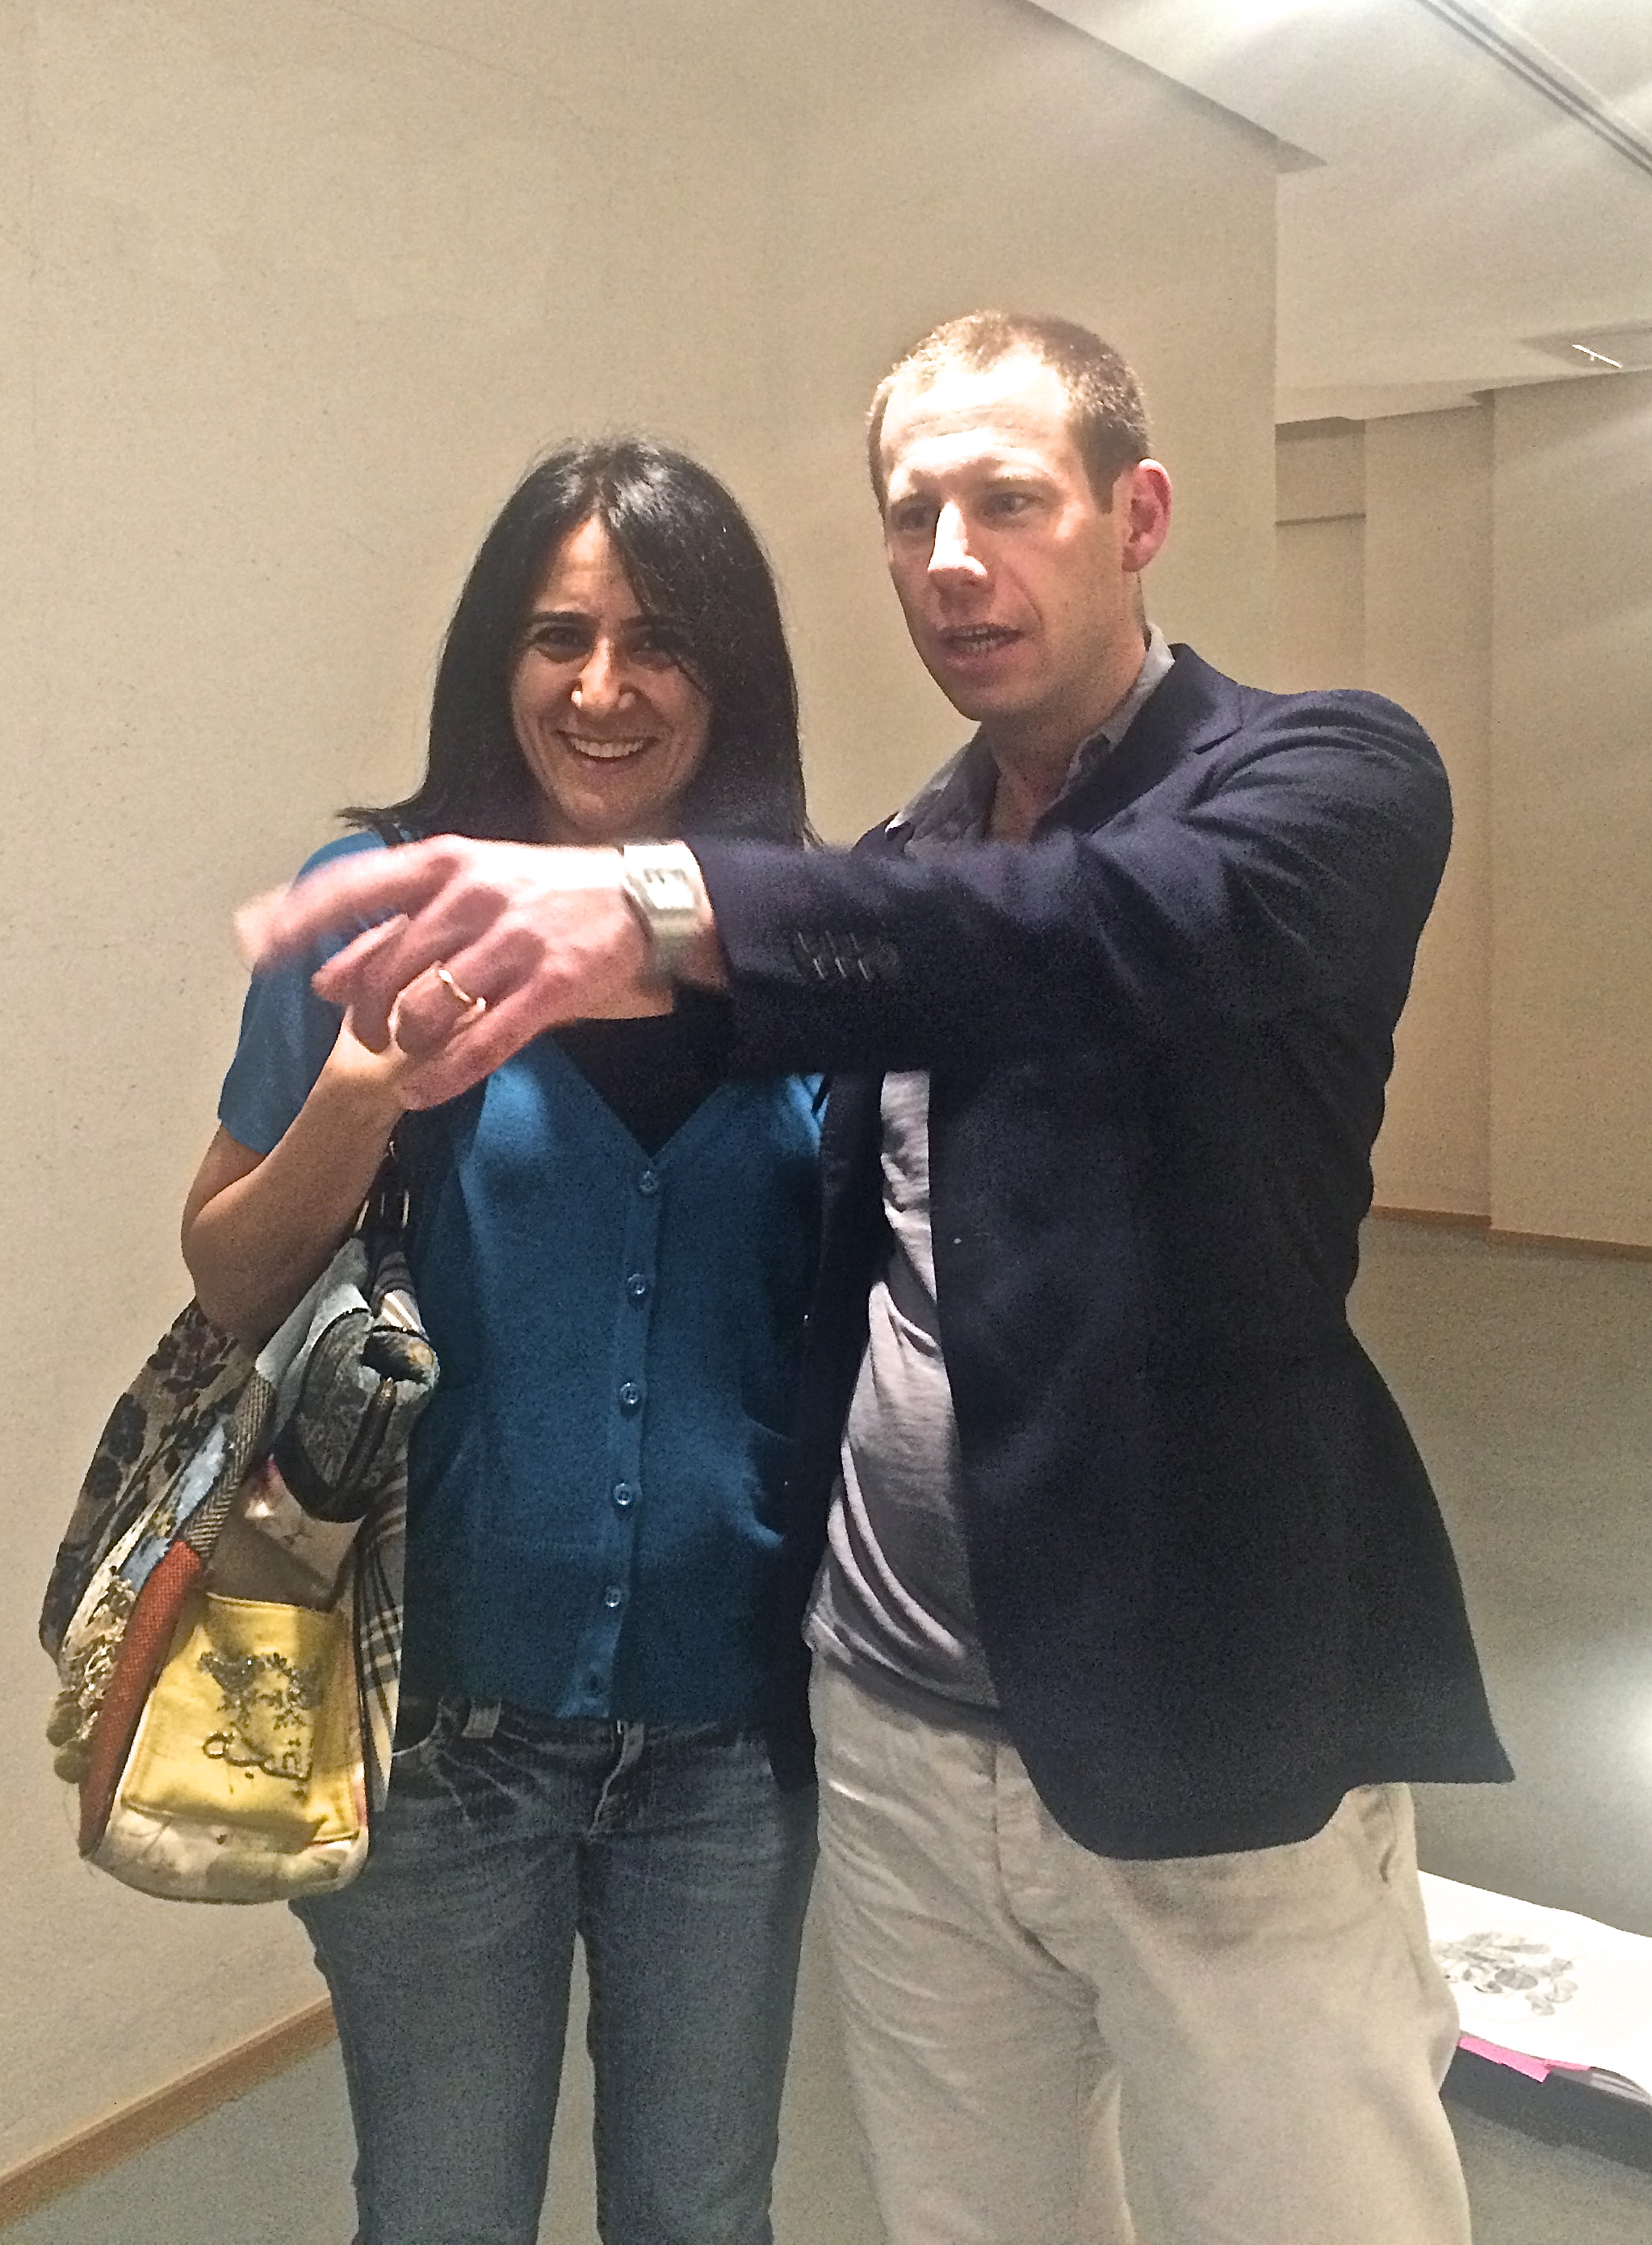 sunday 15 } i met GAF co-director turi munthe and dragged him outside to our exhibition (hey, someone had to do it)